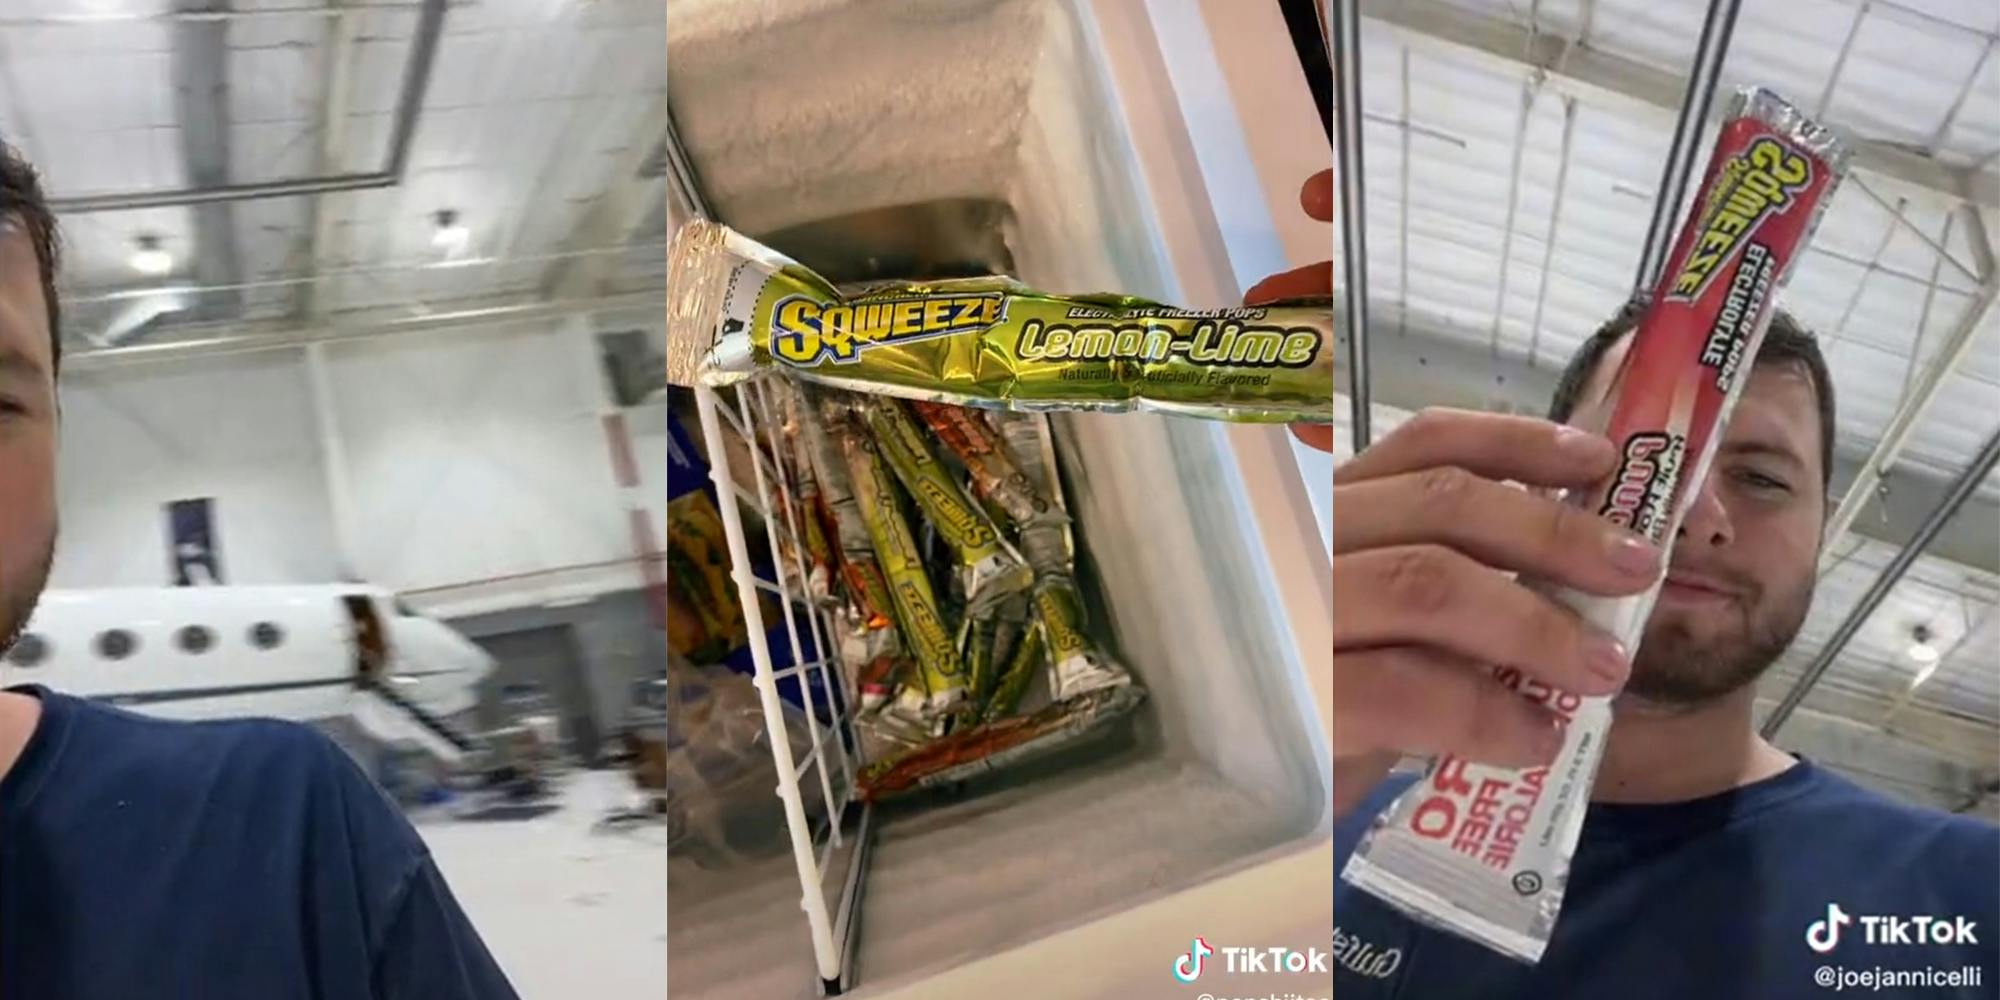 man in airplane hangar (l) hand holding lemon-lime sqweeze popsicle (c) man in airplane hanger holding popsicle (r)